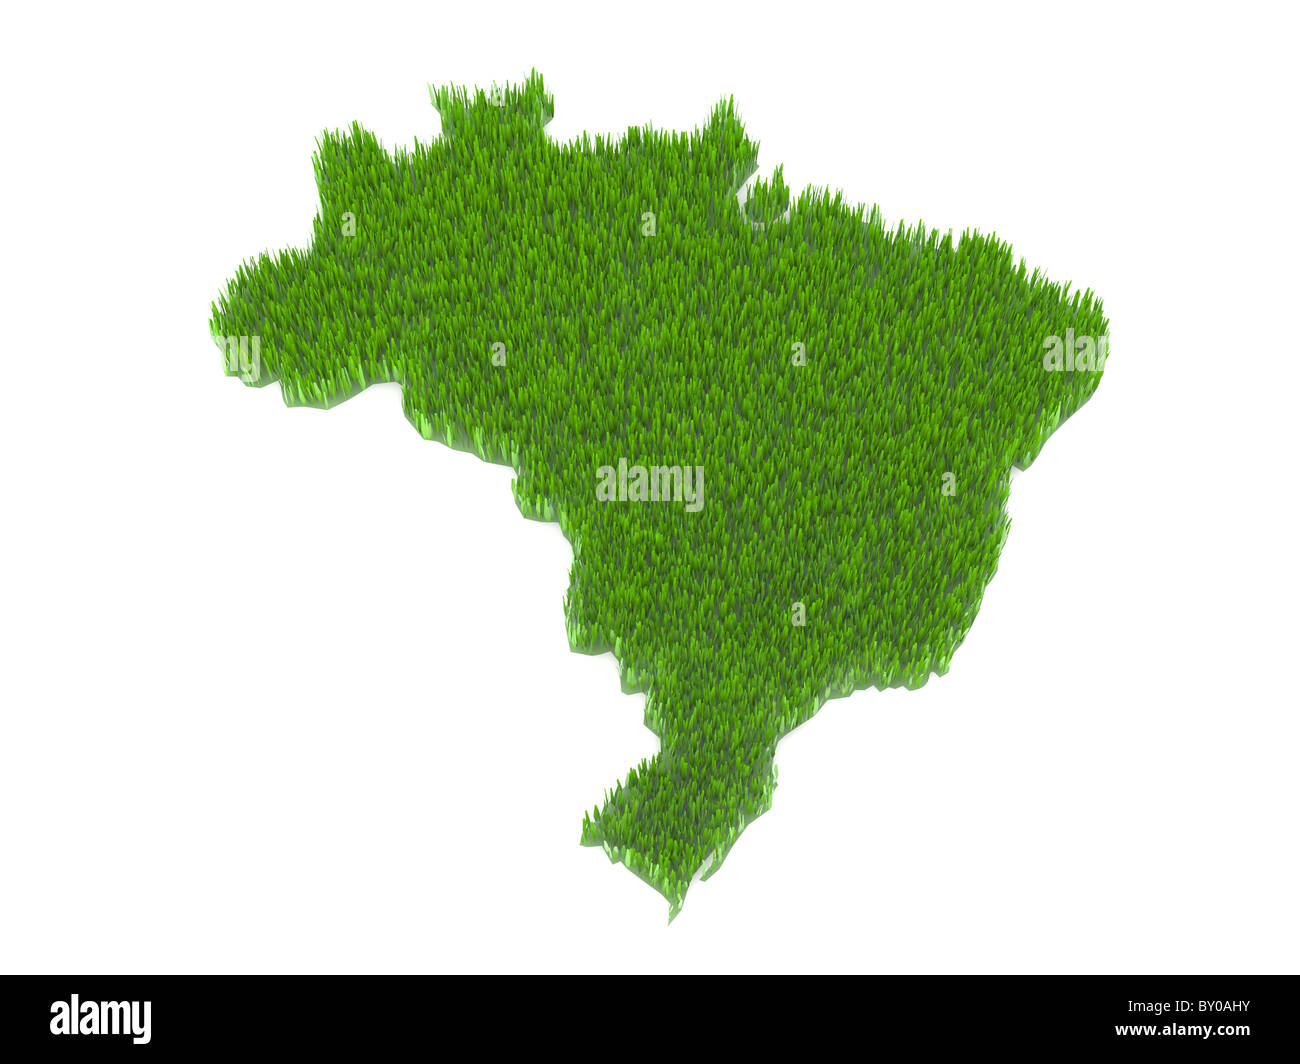 green brasil nation map with grass 3d illustration Stock Photo